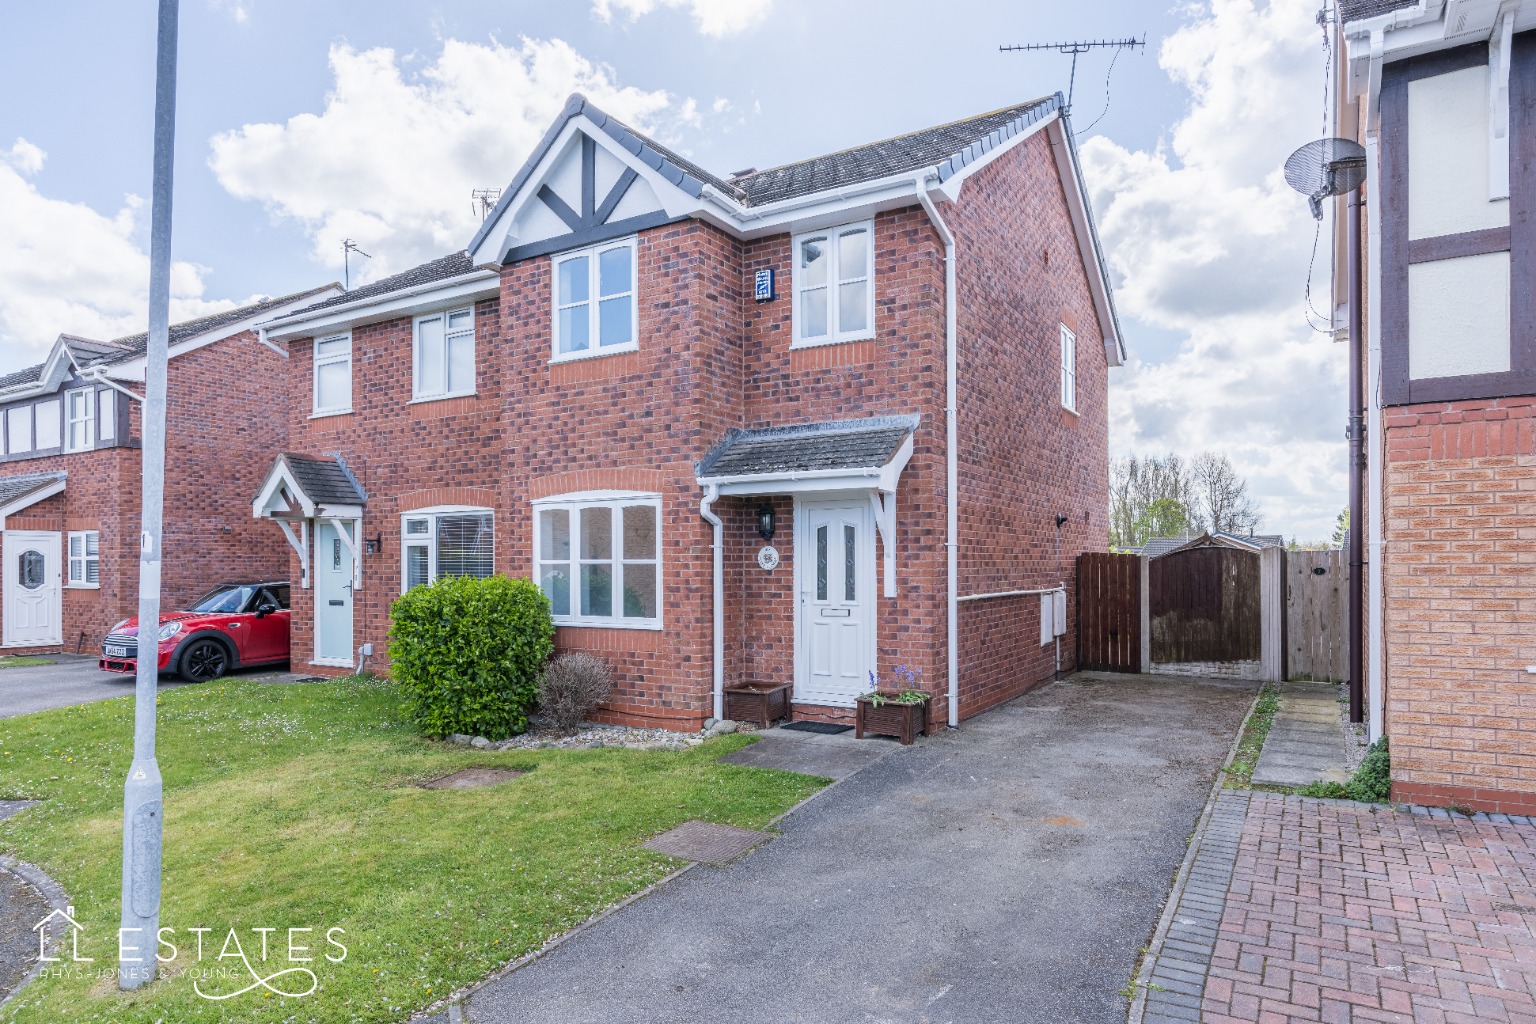 3 bed semi-detached house for sale in Llys Elinor - Property Image 1